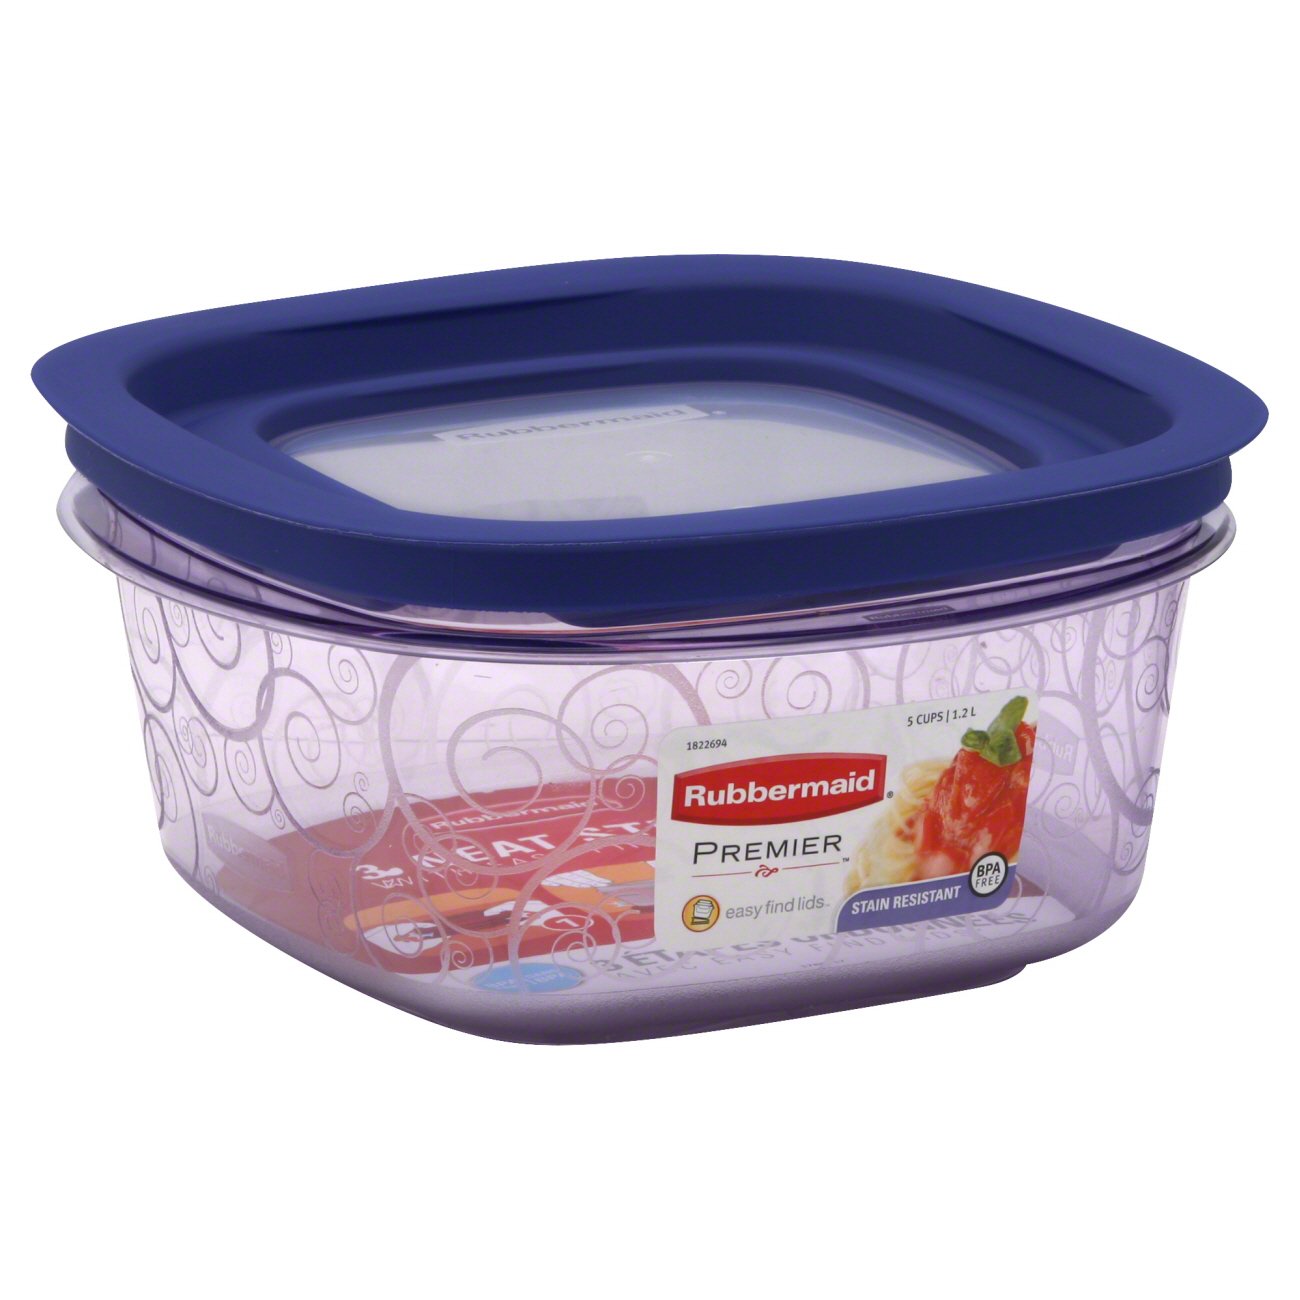 Rubbermaid Easy Find Lids Container, Easy Find Lids, 1.2 Liter